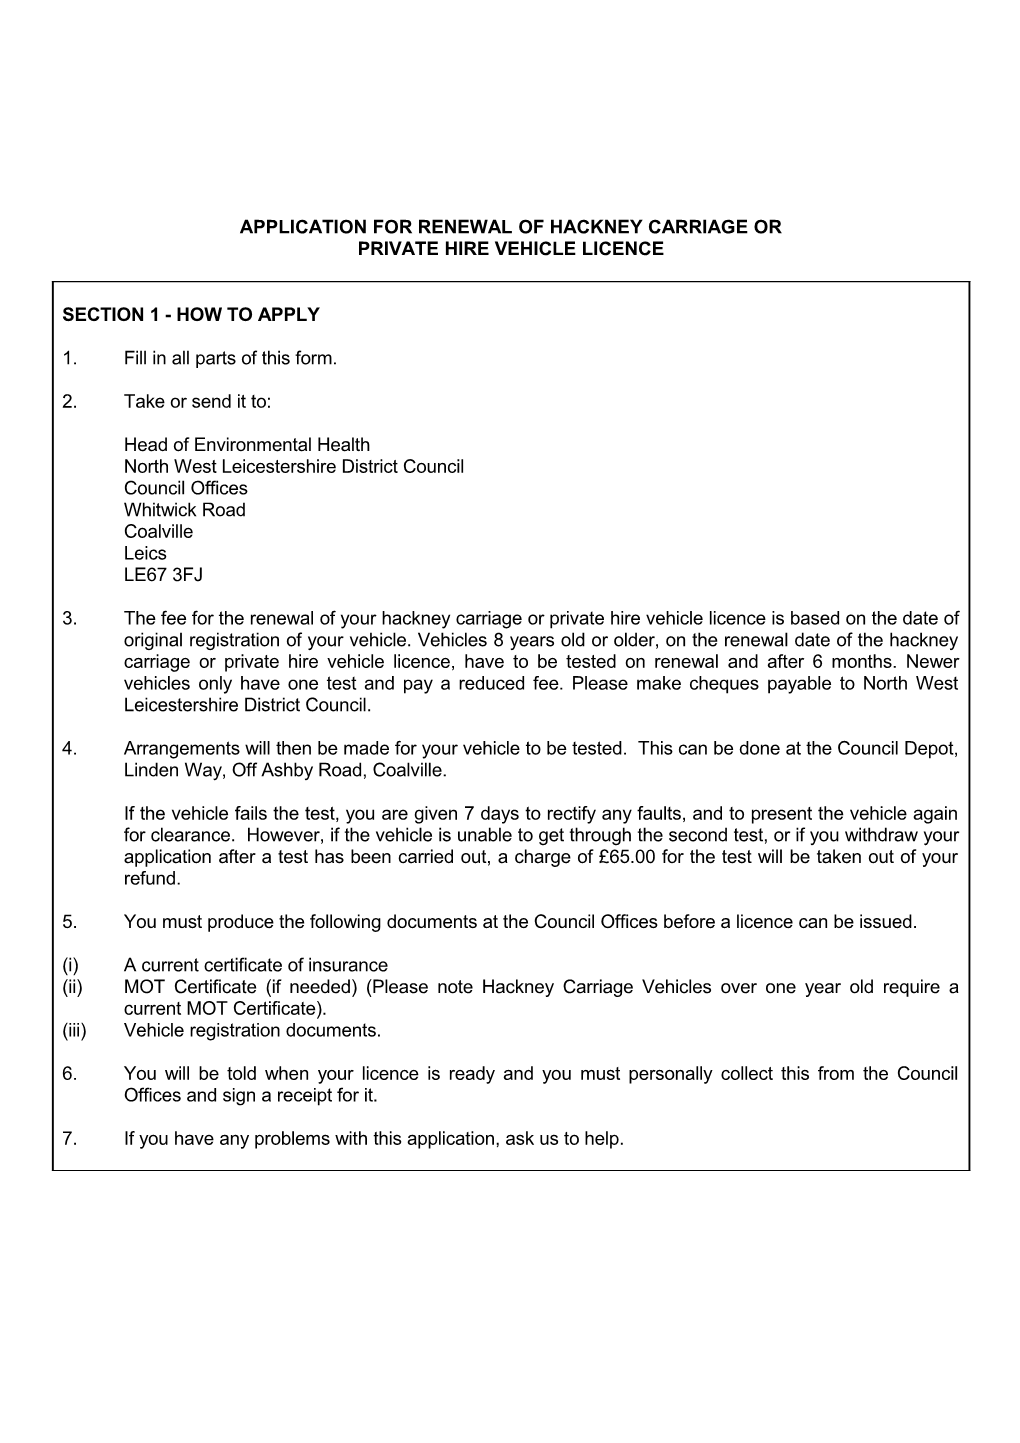 Application for Renewal of Hackney Carriage Or